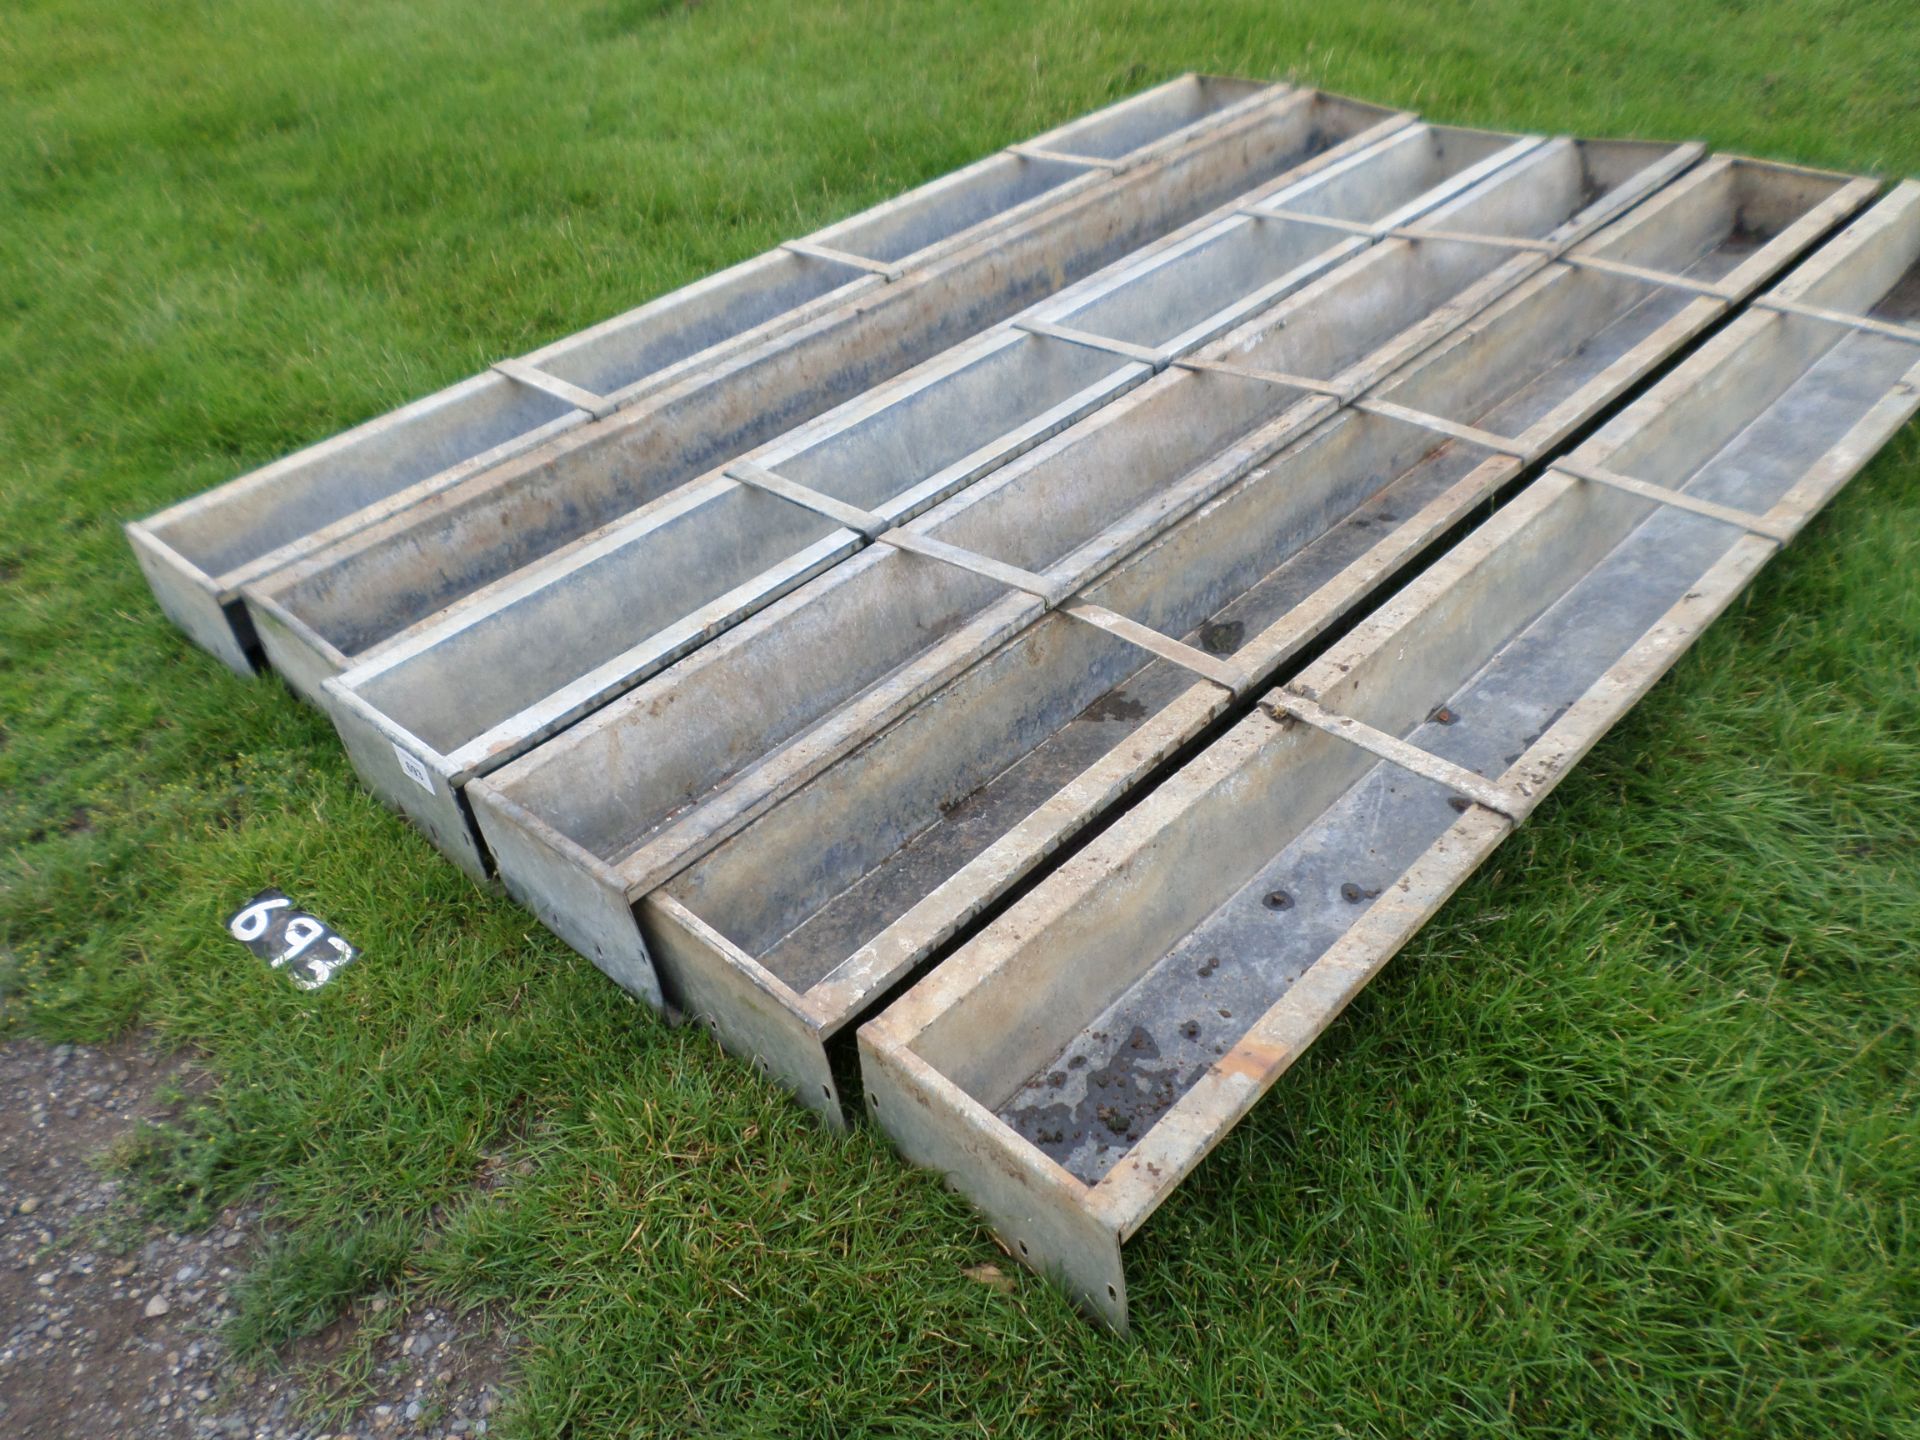 6 x Ritchie heavy duty 9' cattle /sheep troughs - Image 2 of 2